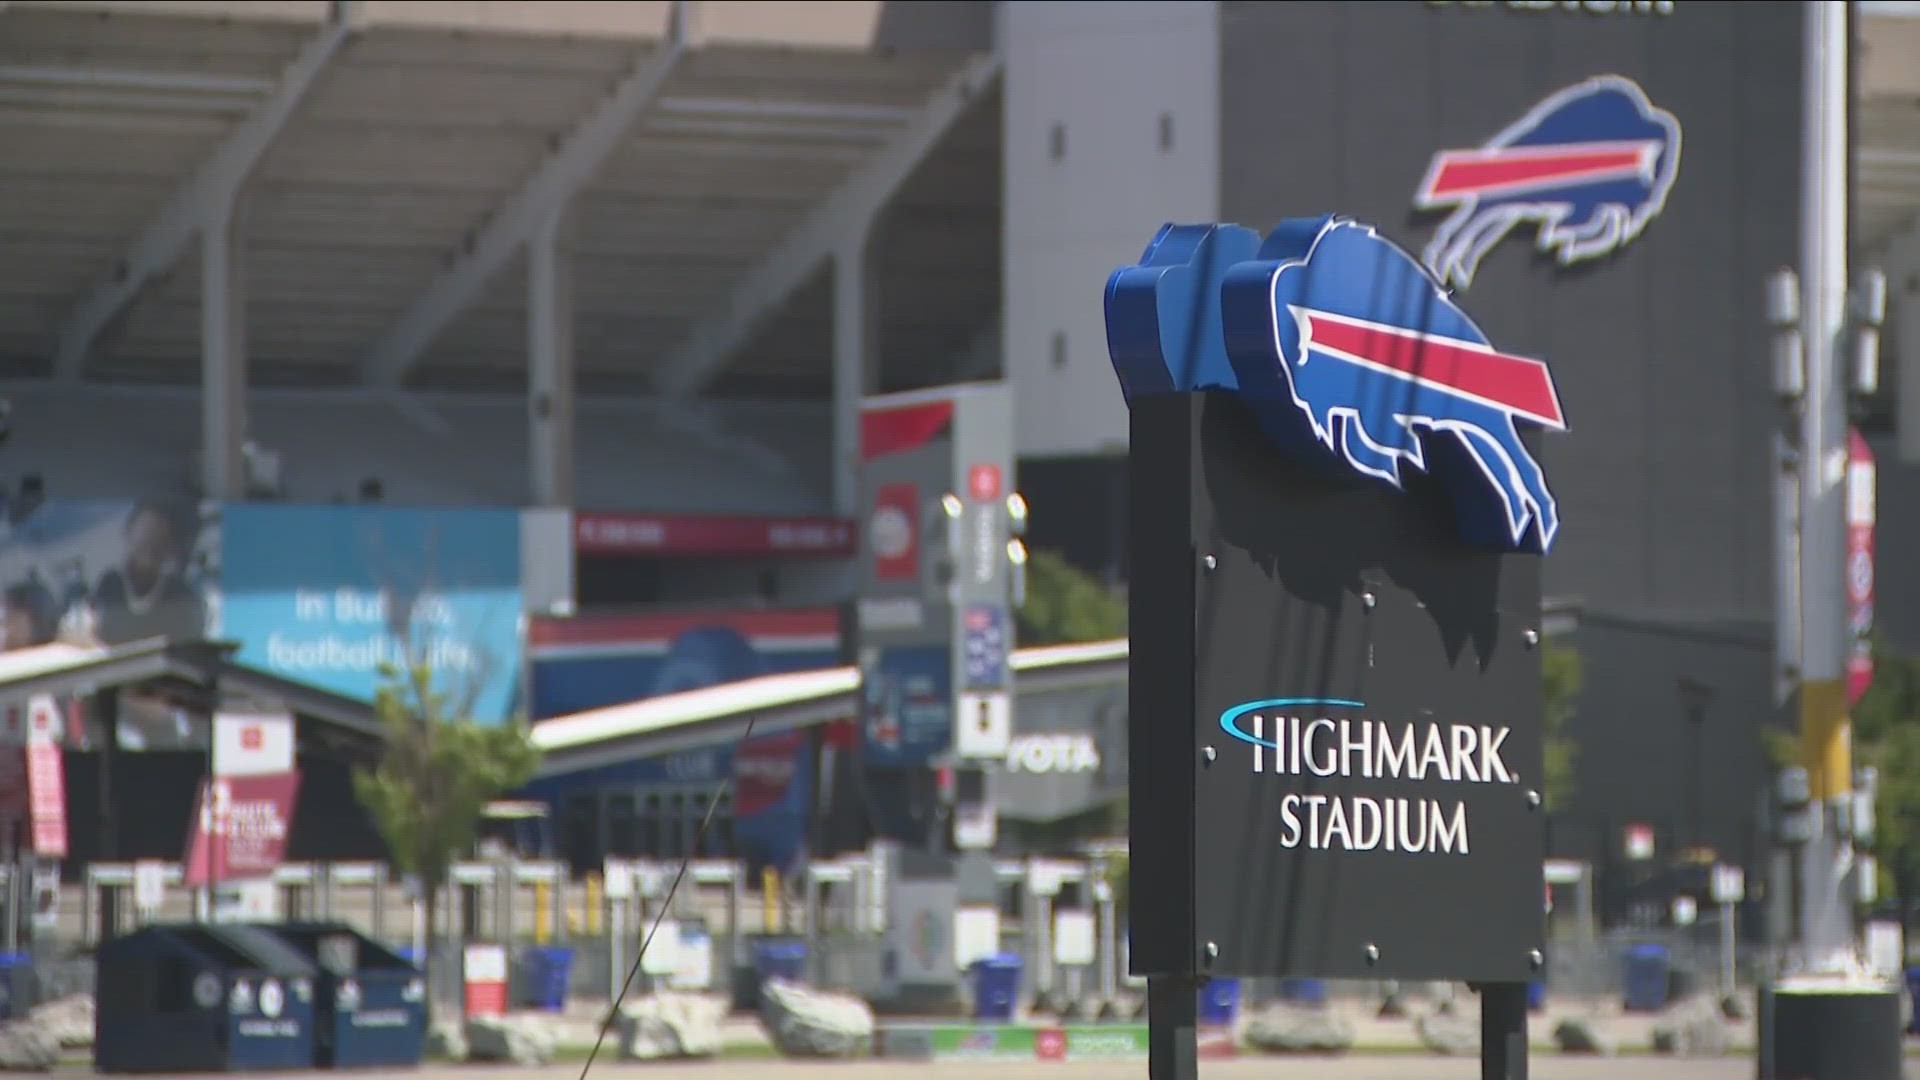 Bills fans may face parking problems Saturday